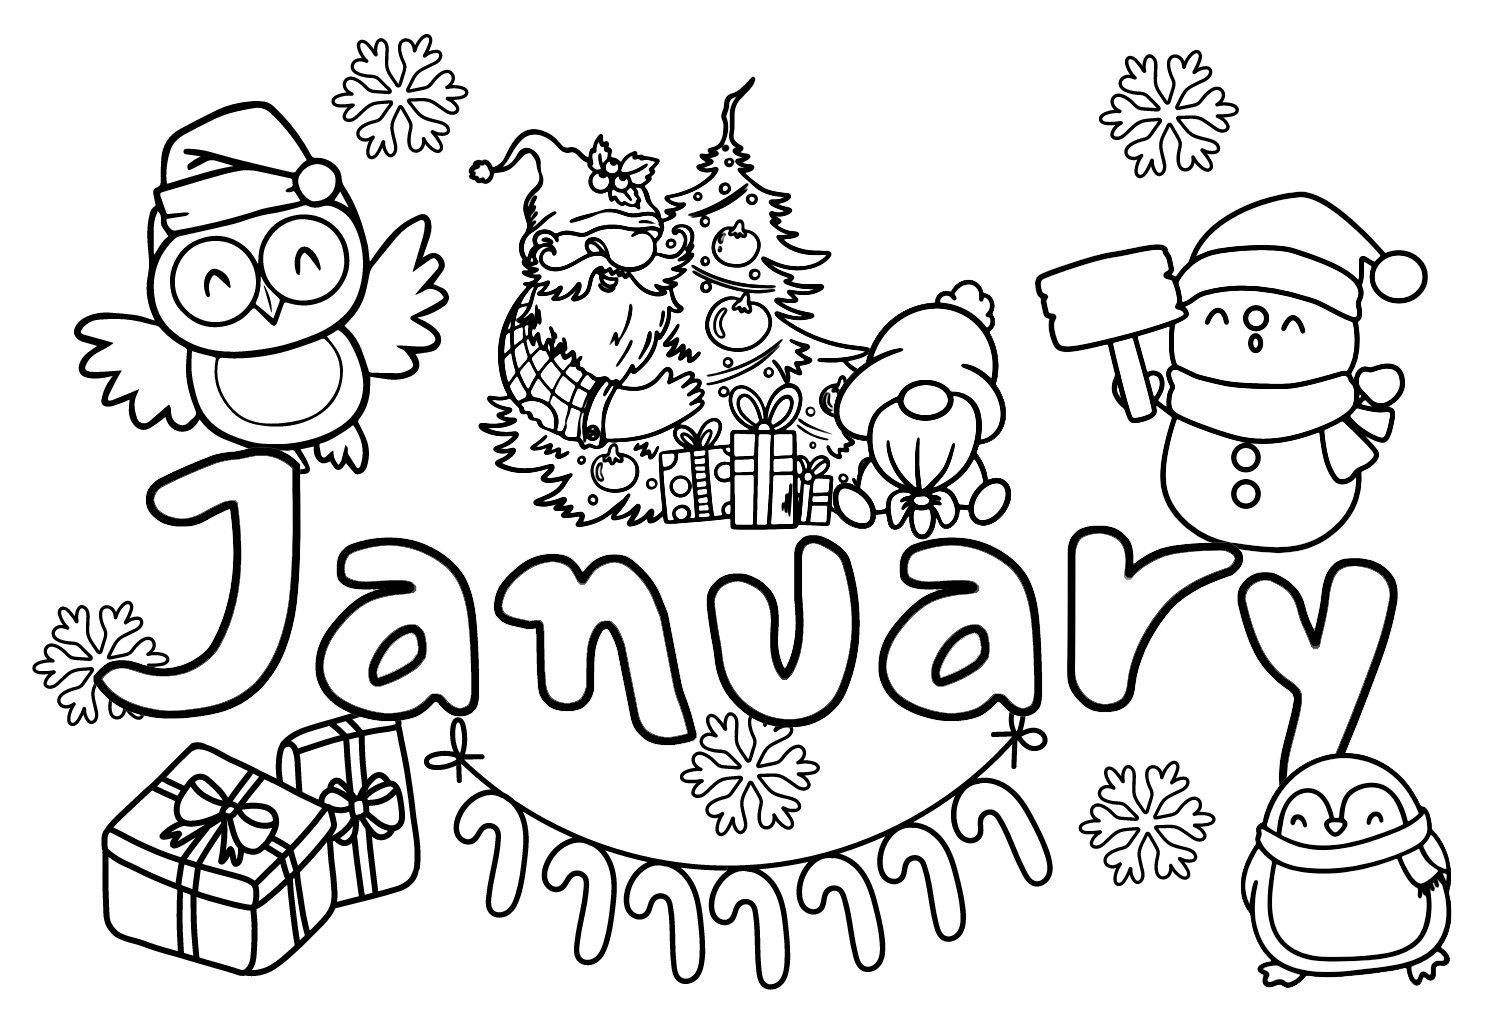 January Winter Coloring Page - Free Printable Coloring Pages